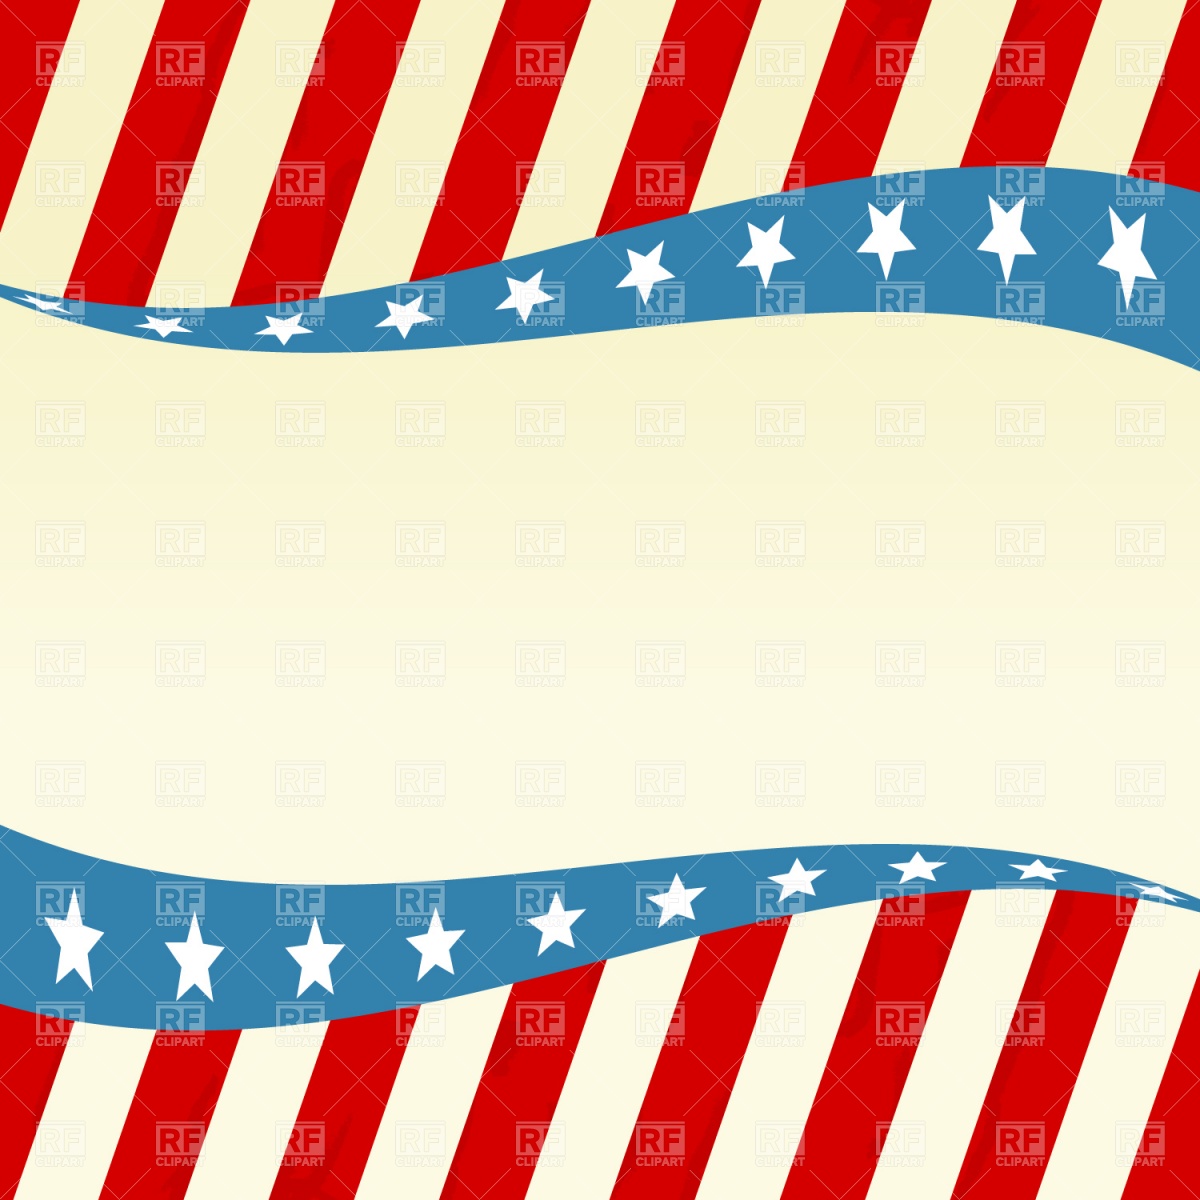 Patriotic Wave With Stars And Red White Blue 942 Download Royalty